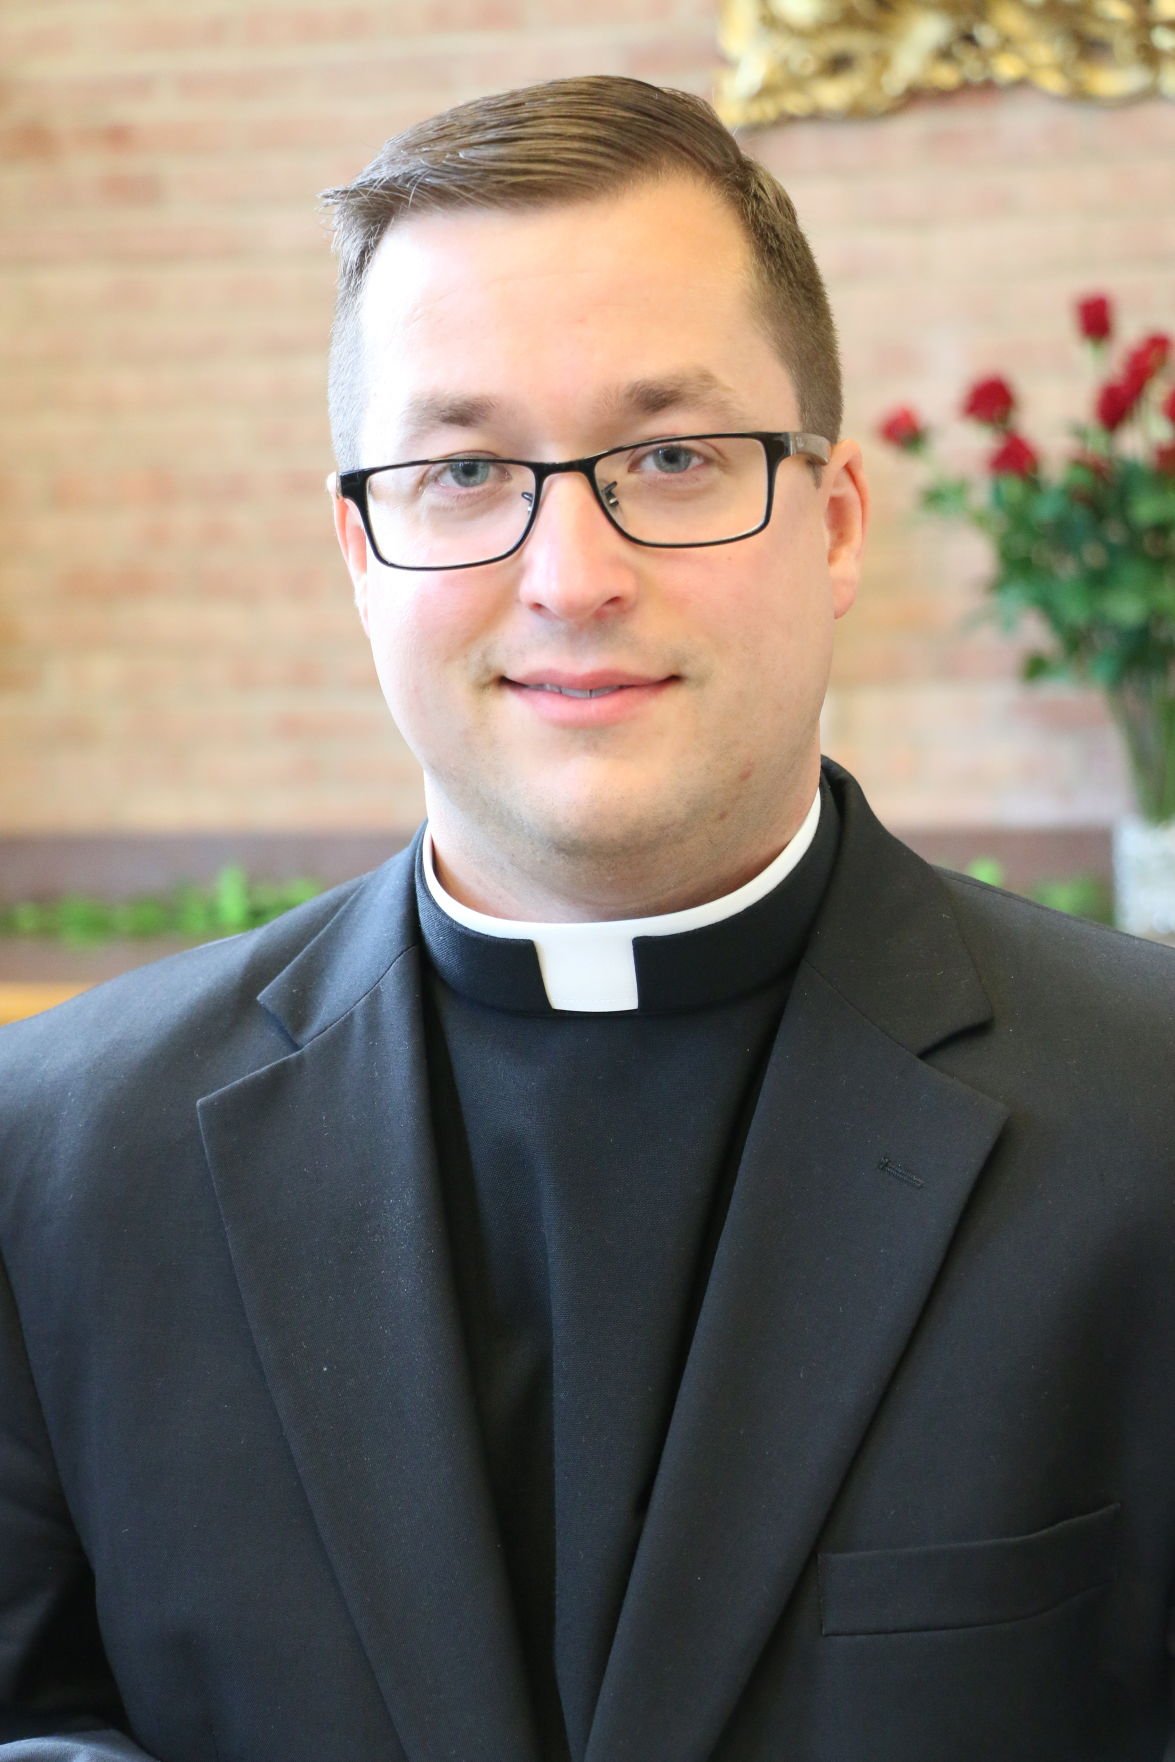 Two priests removed by Diocese of Erie | News | meadvilletribune.com